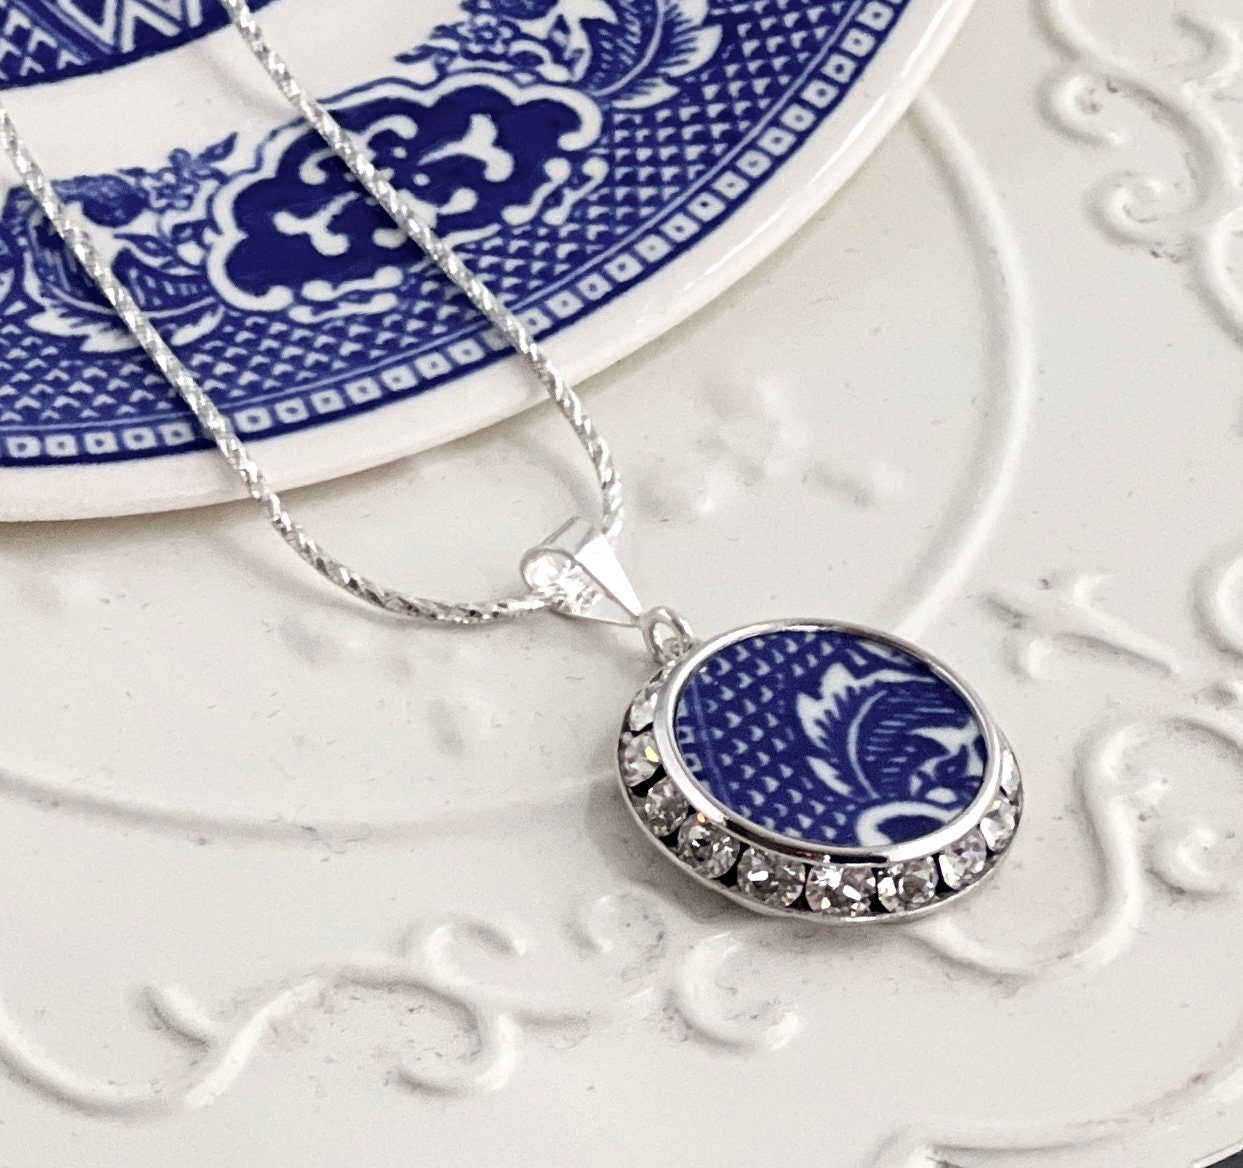 Vintage Blue Willow Ware Jewelry, Adjustable Broken China Jewelry Necklace, Unique Anniversary Gift for Her